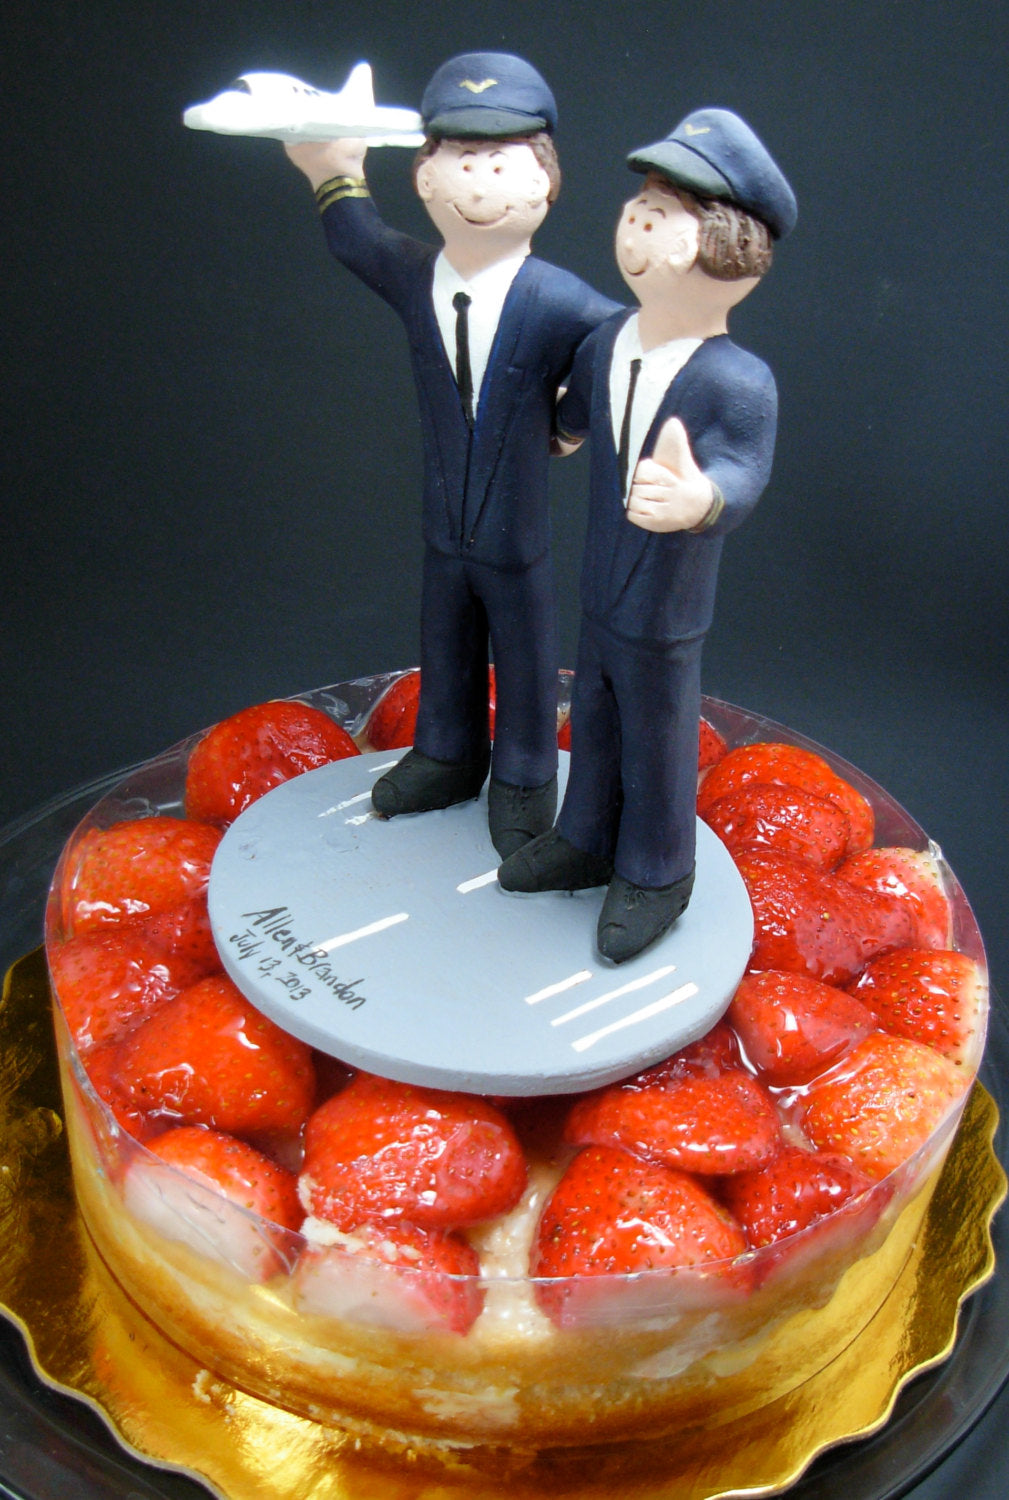 Wedding Cake Topper for Two Gays, Gay Wedding Figurine, Same Sex Wedding Cake Topper, Two Men Wedding Cake Topper, gay marriage figurine - iWeddingCakeToppers